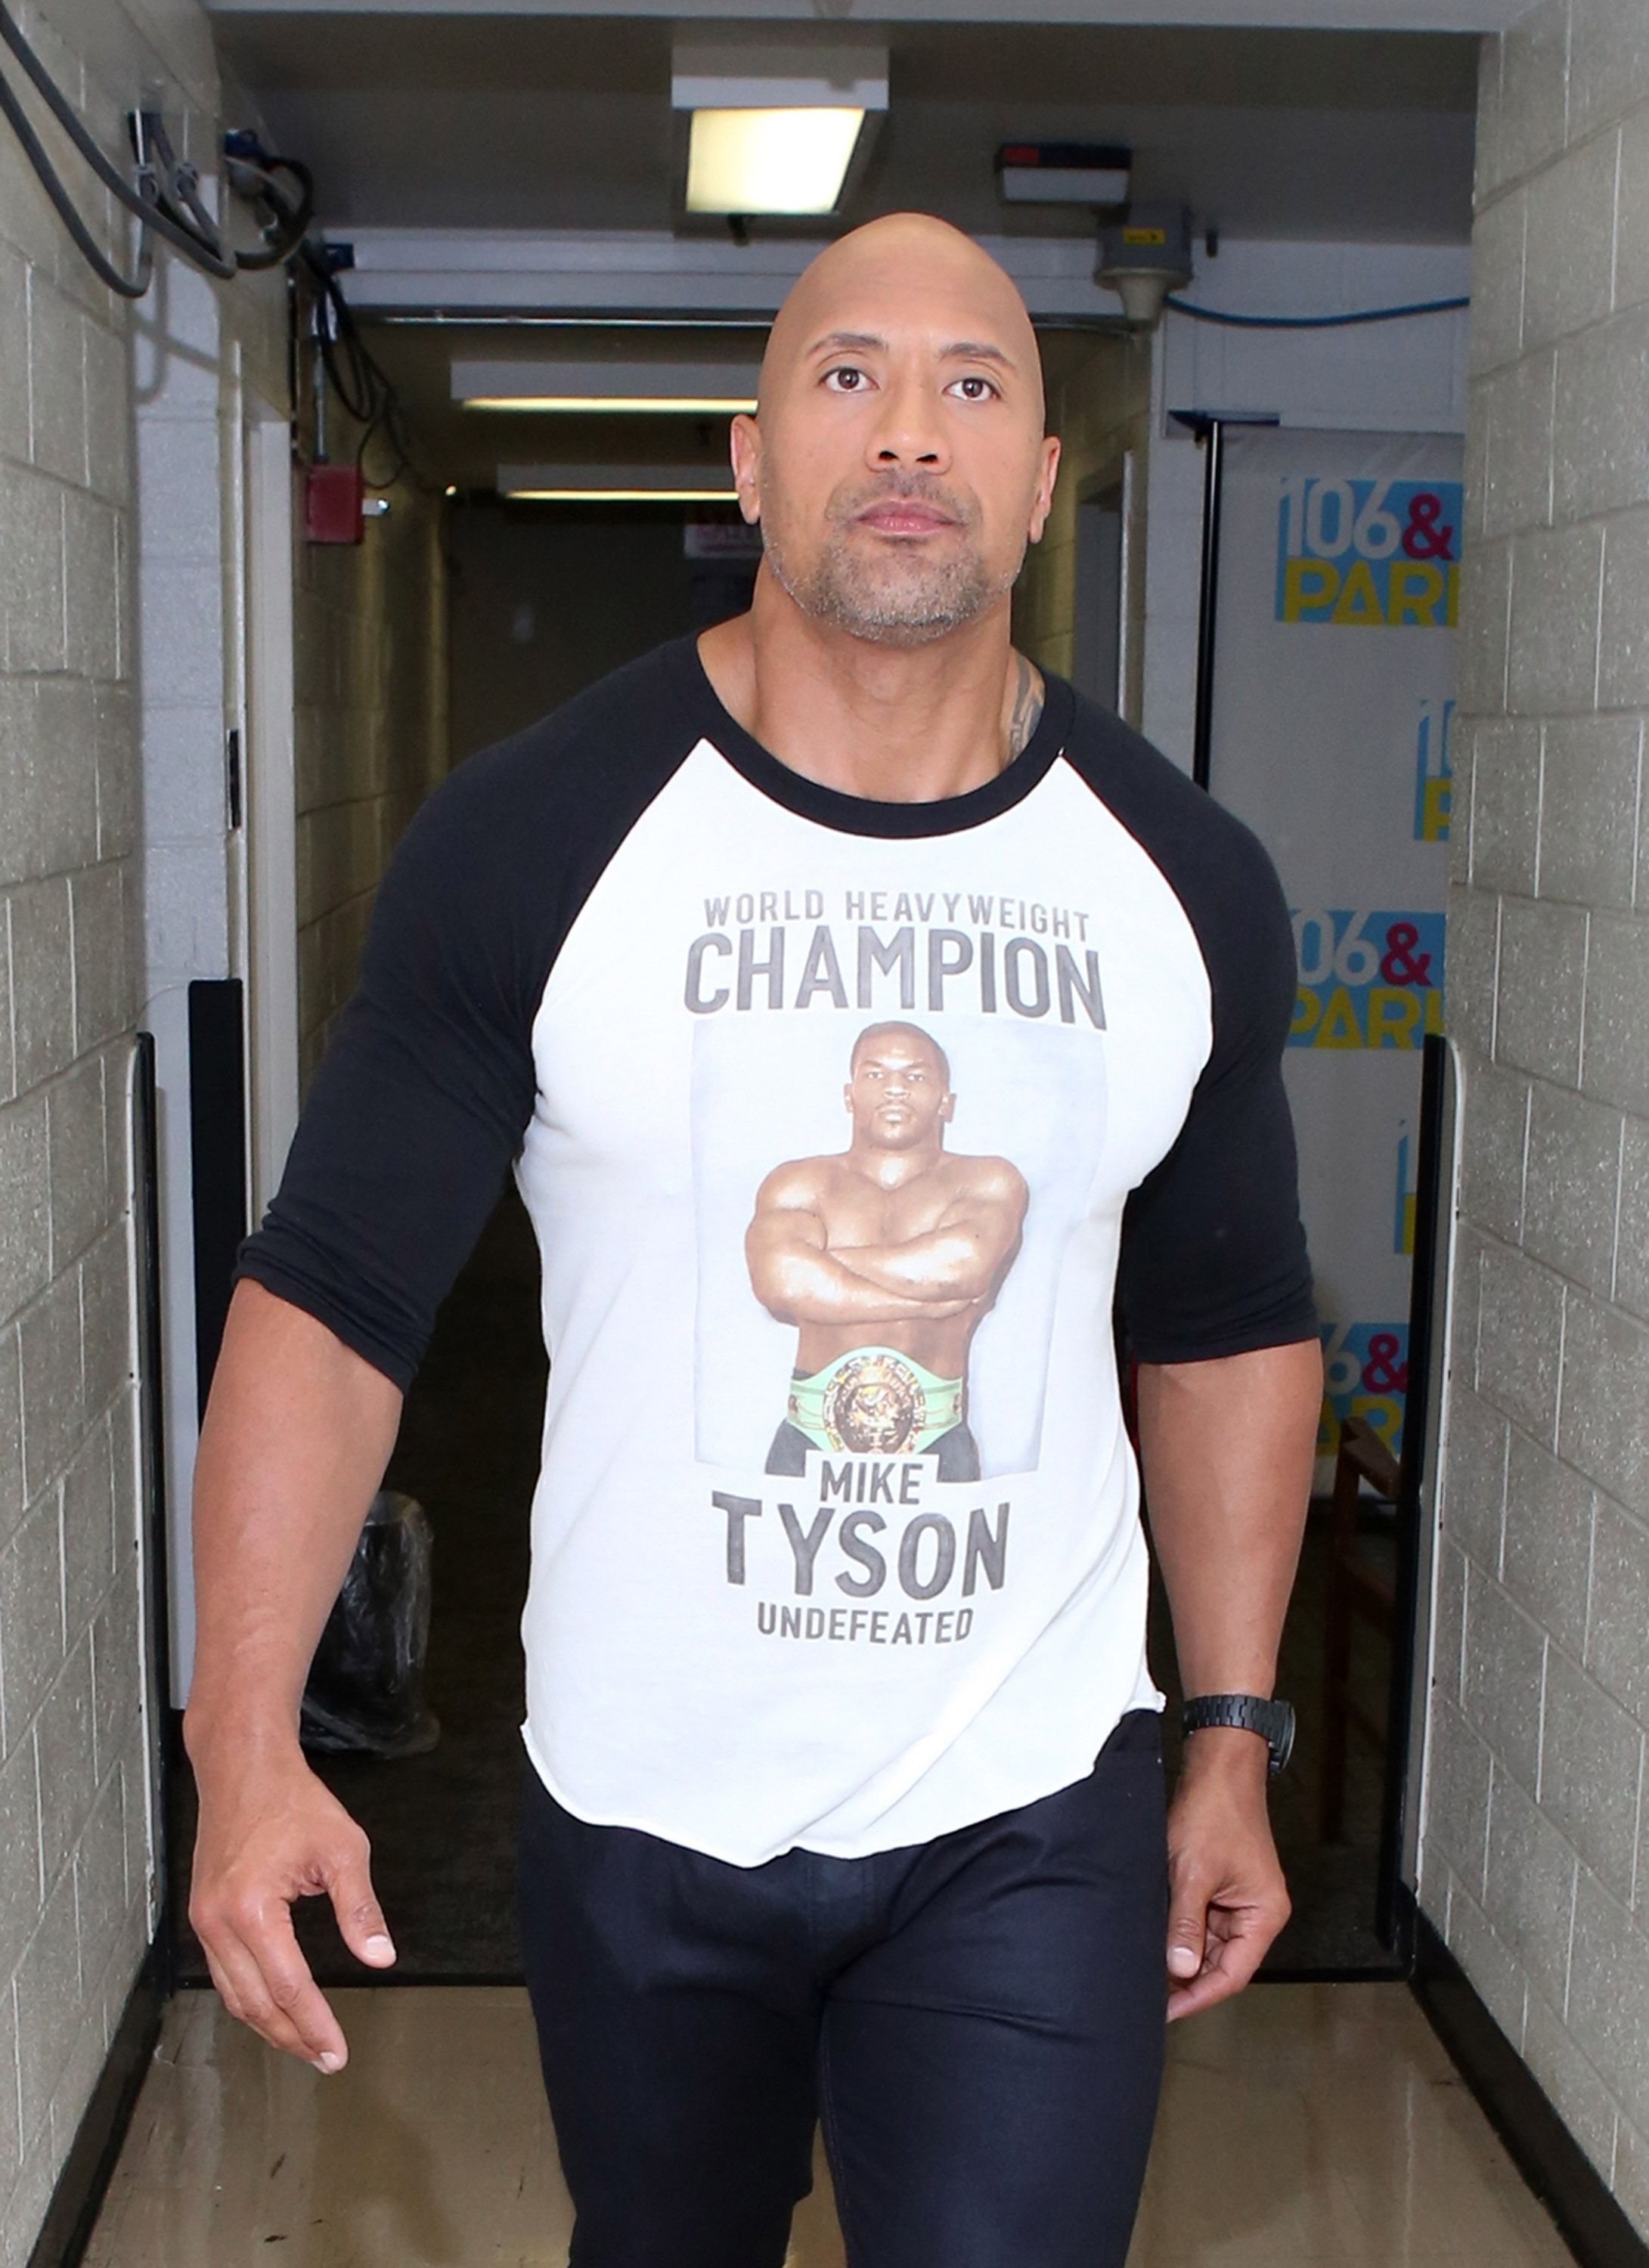 Dwayne Johnson during the 106 & Park at BET studio on July 22, 2014 in New York City. | Source: Getty Images